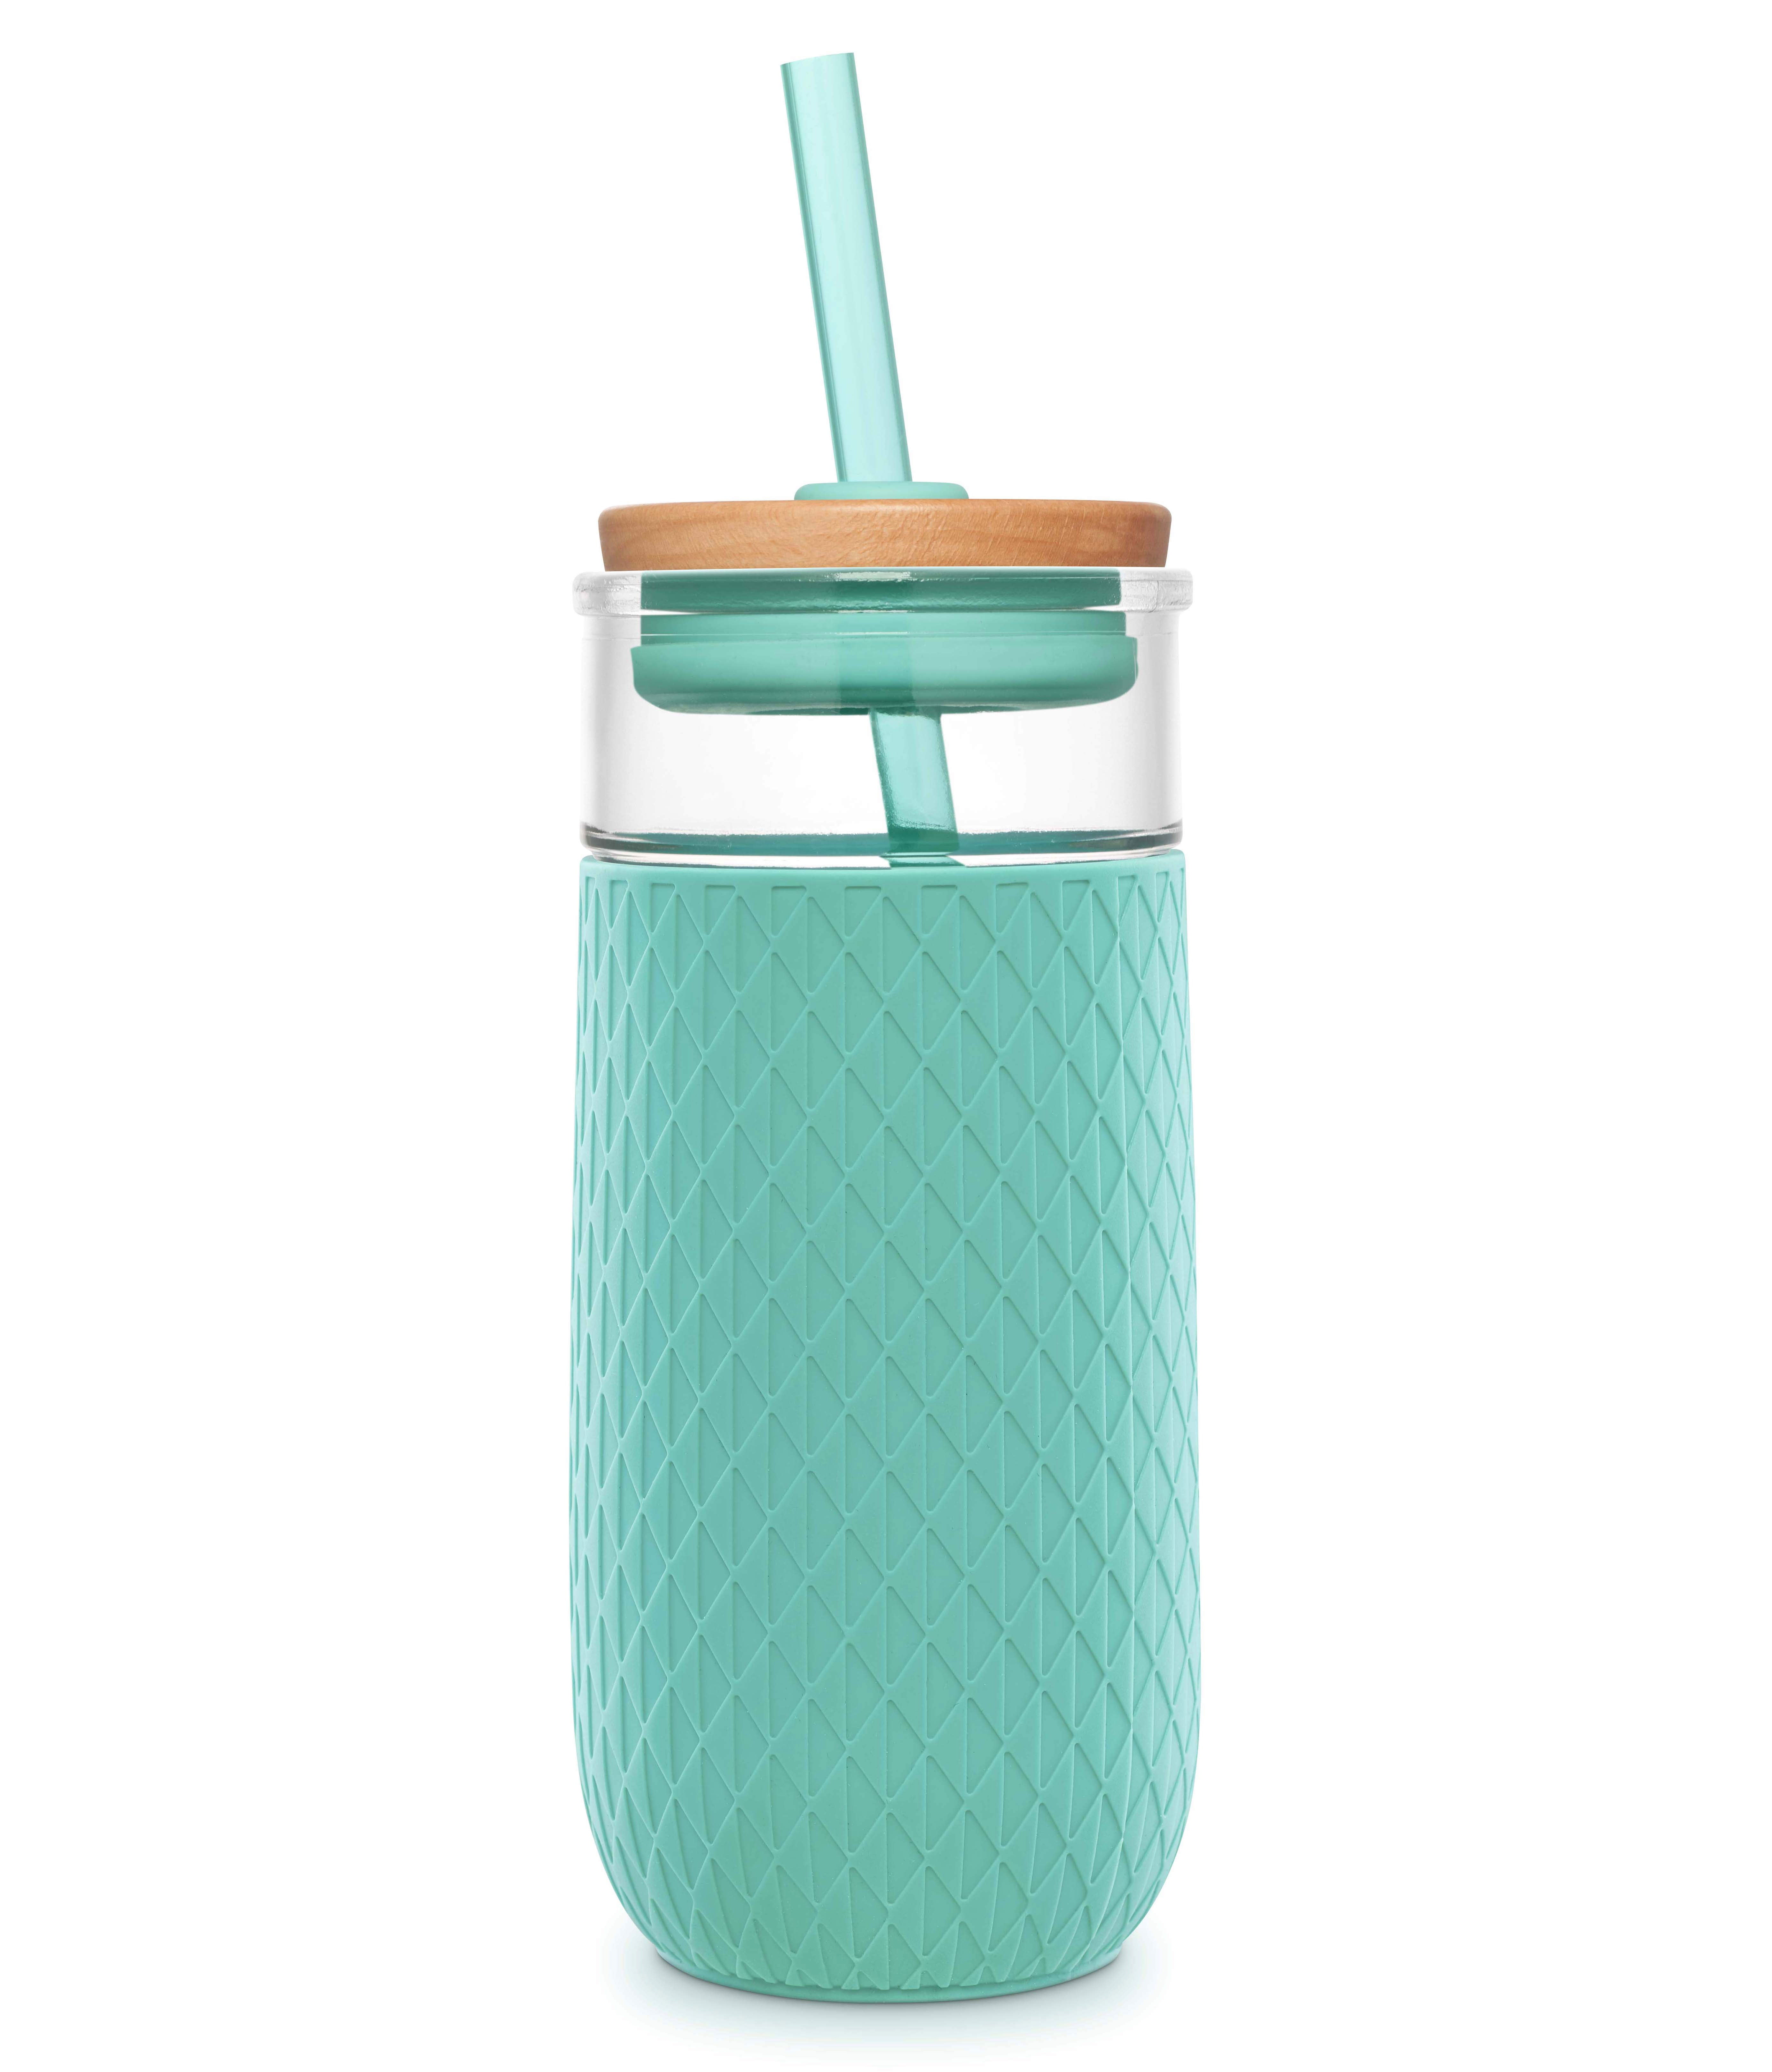 Ello Products on X: Our best-selling Devon 18oz Glass Tumbler is